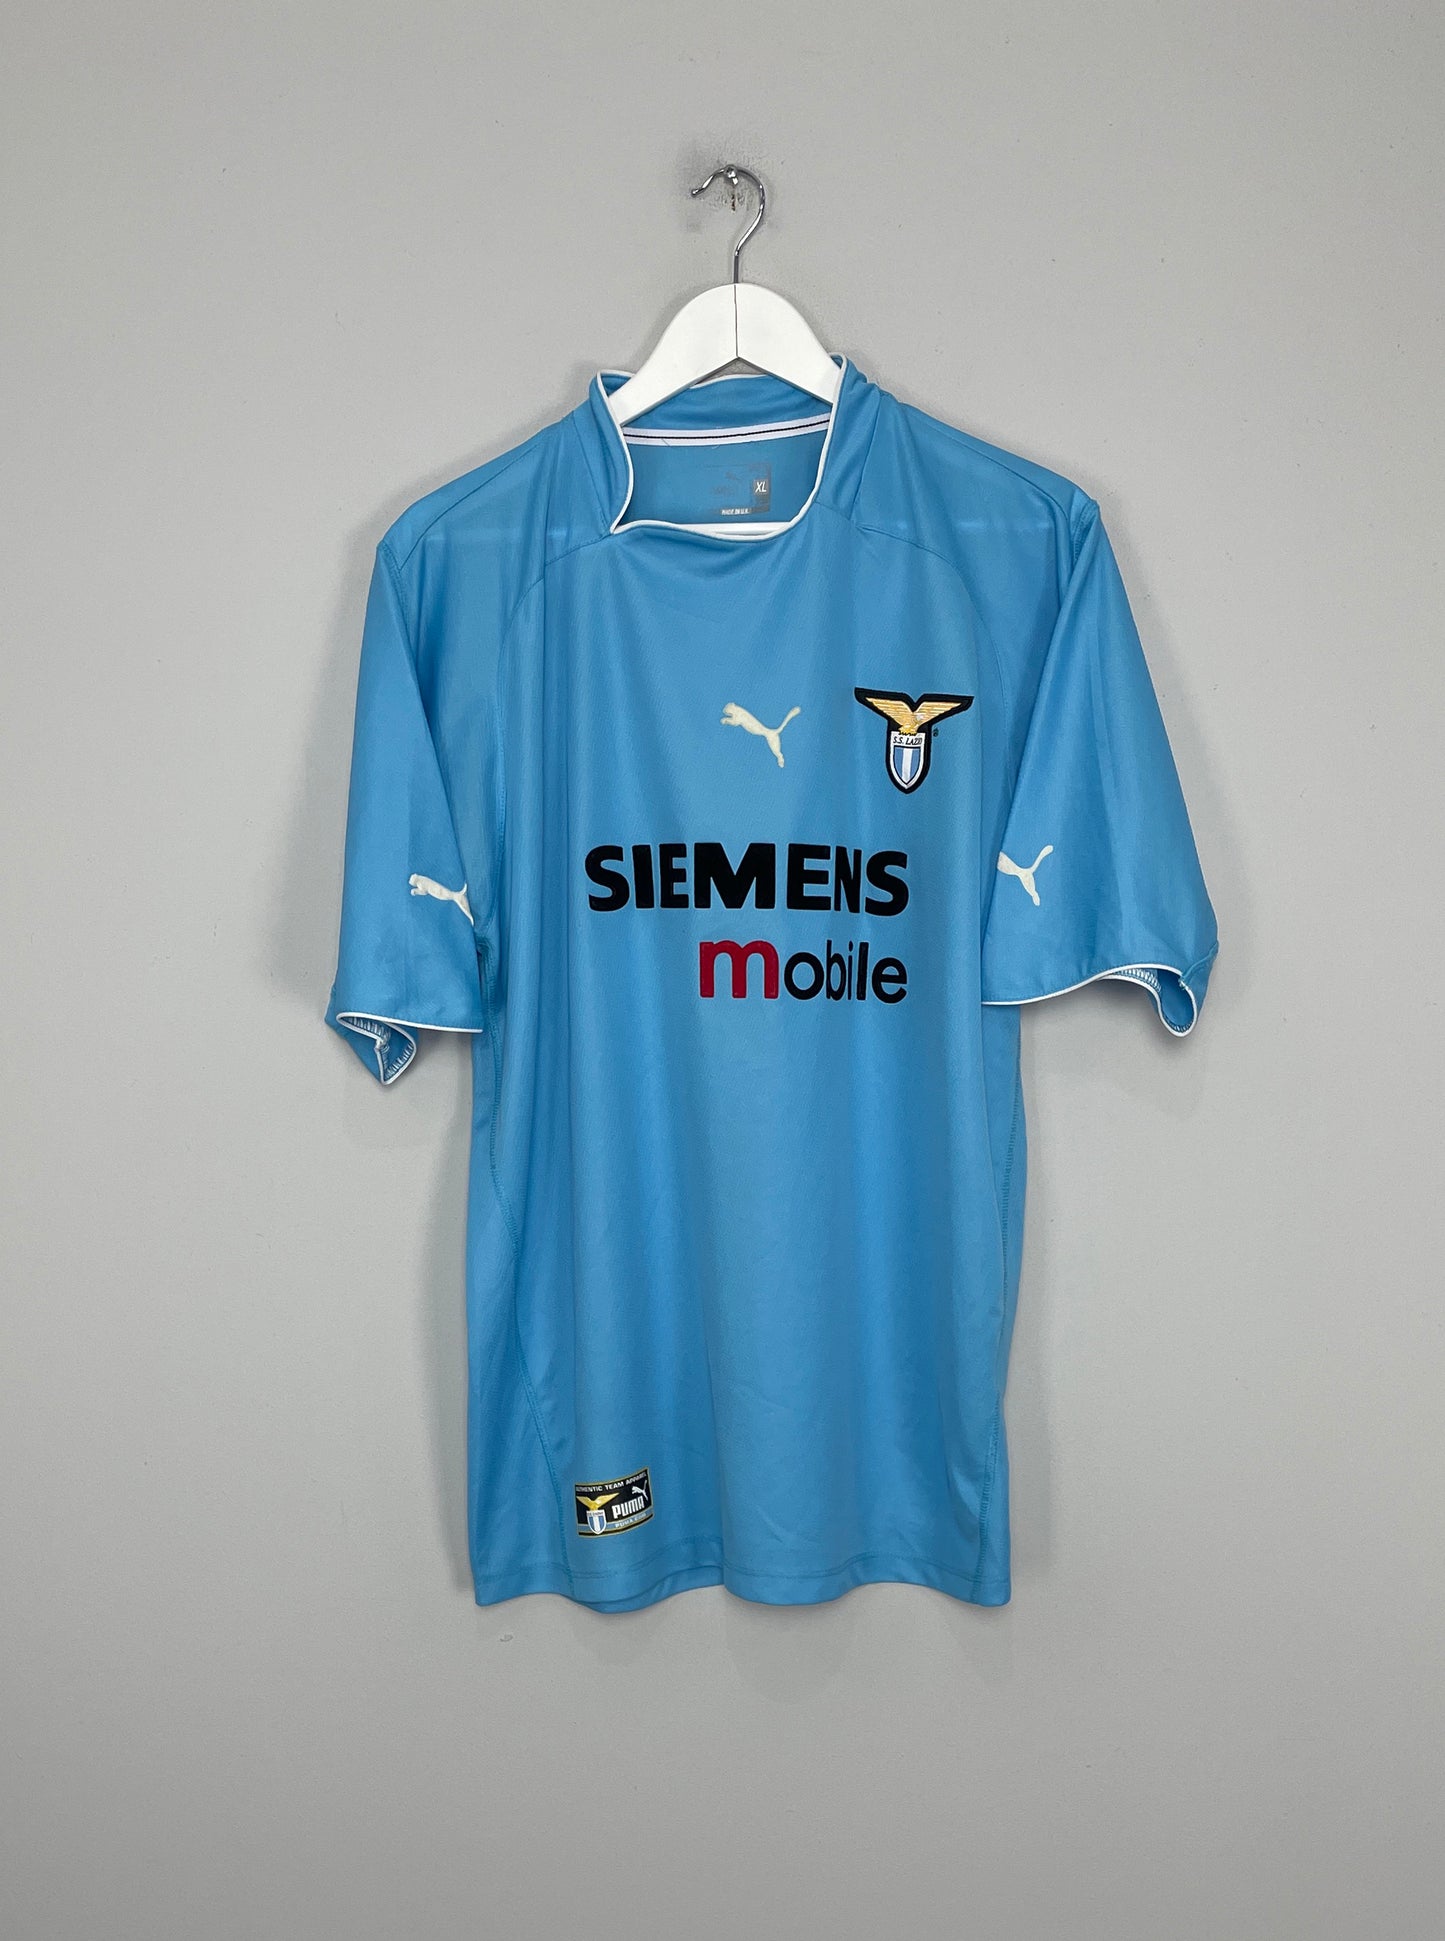 Image of the Lazio shirt from the 2002/03 season